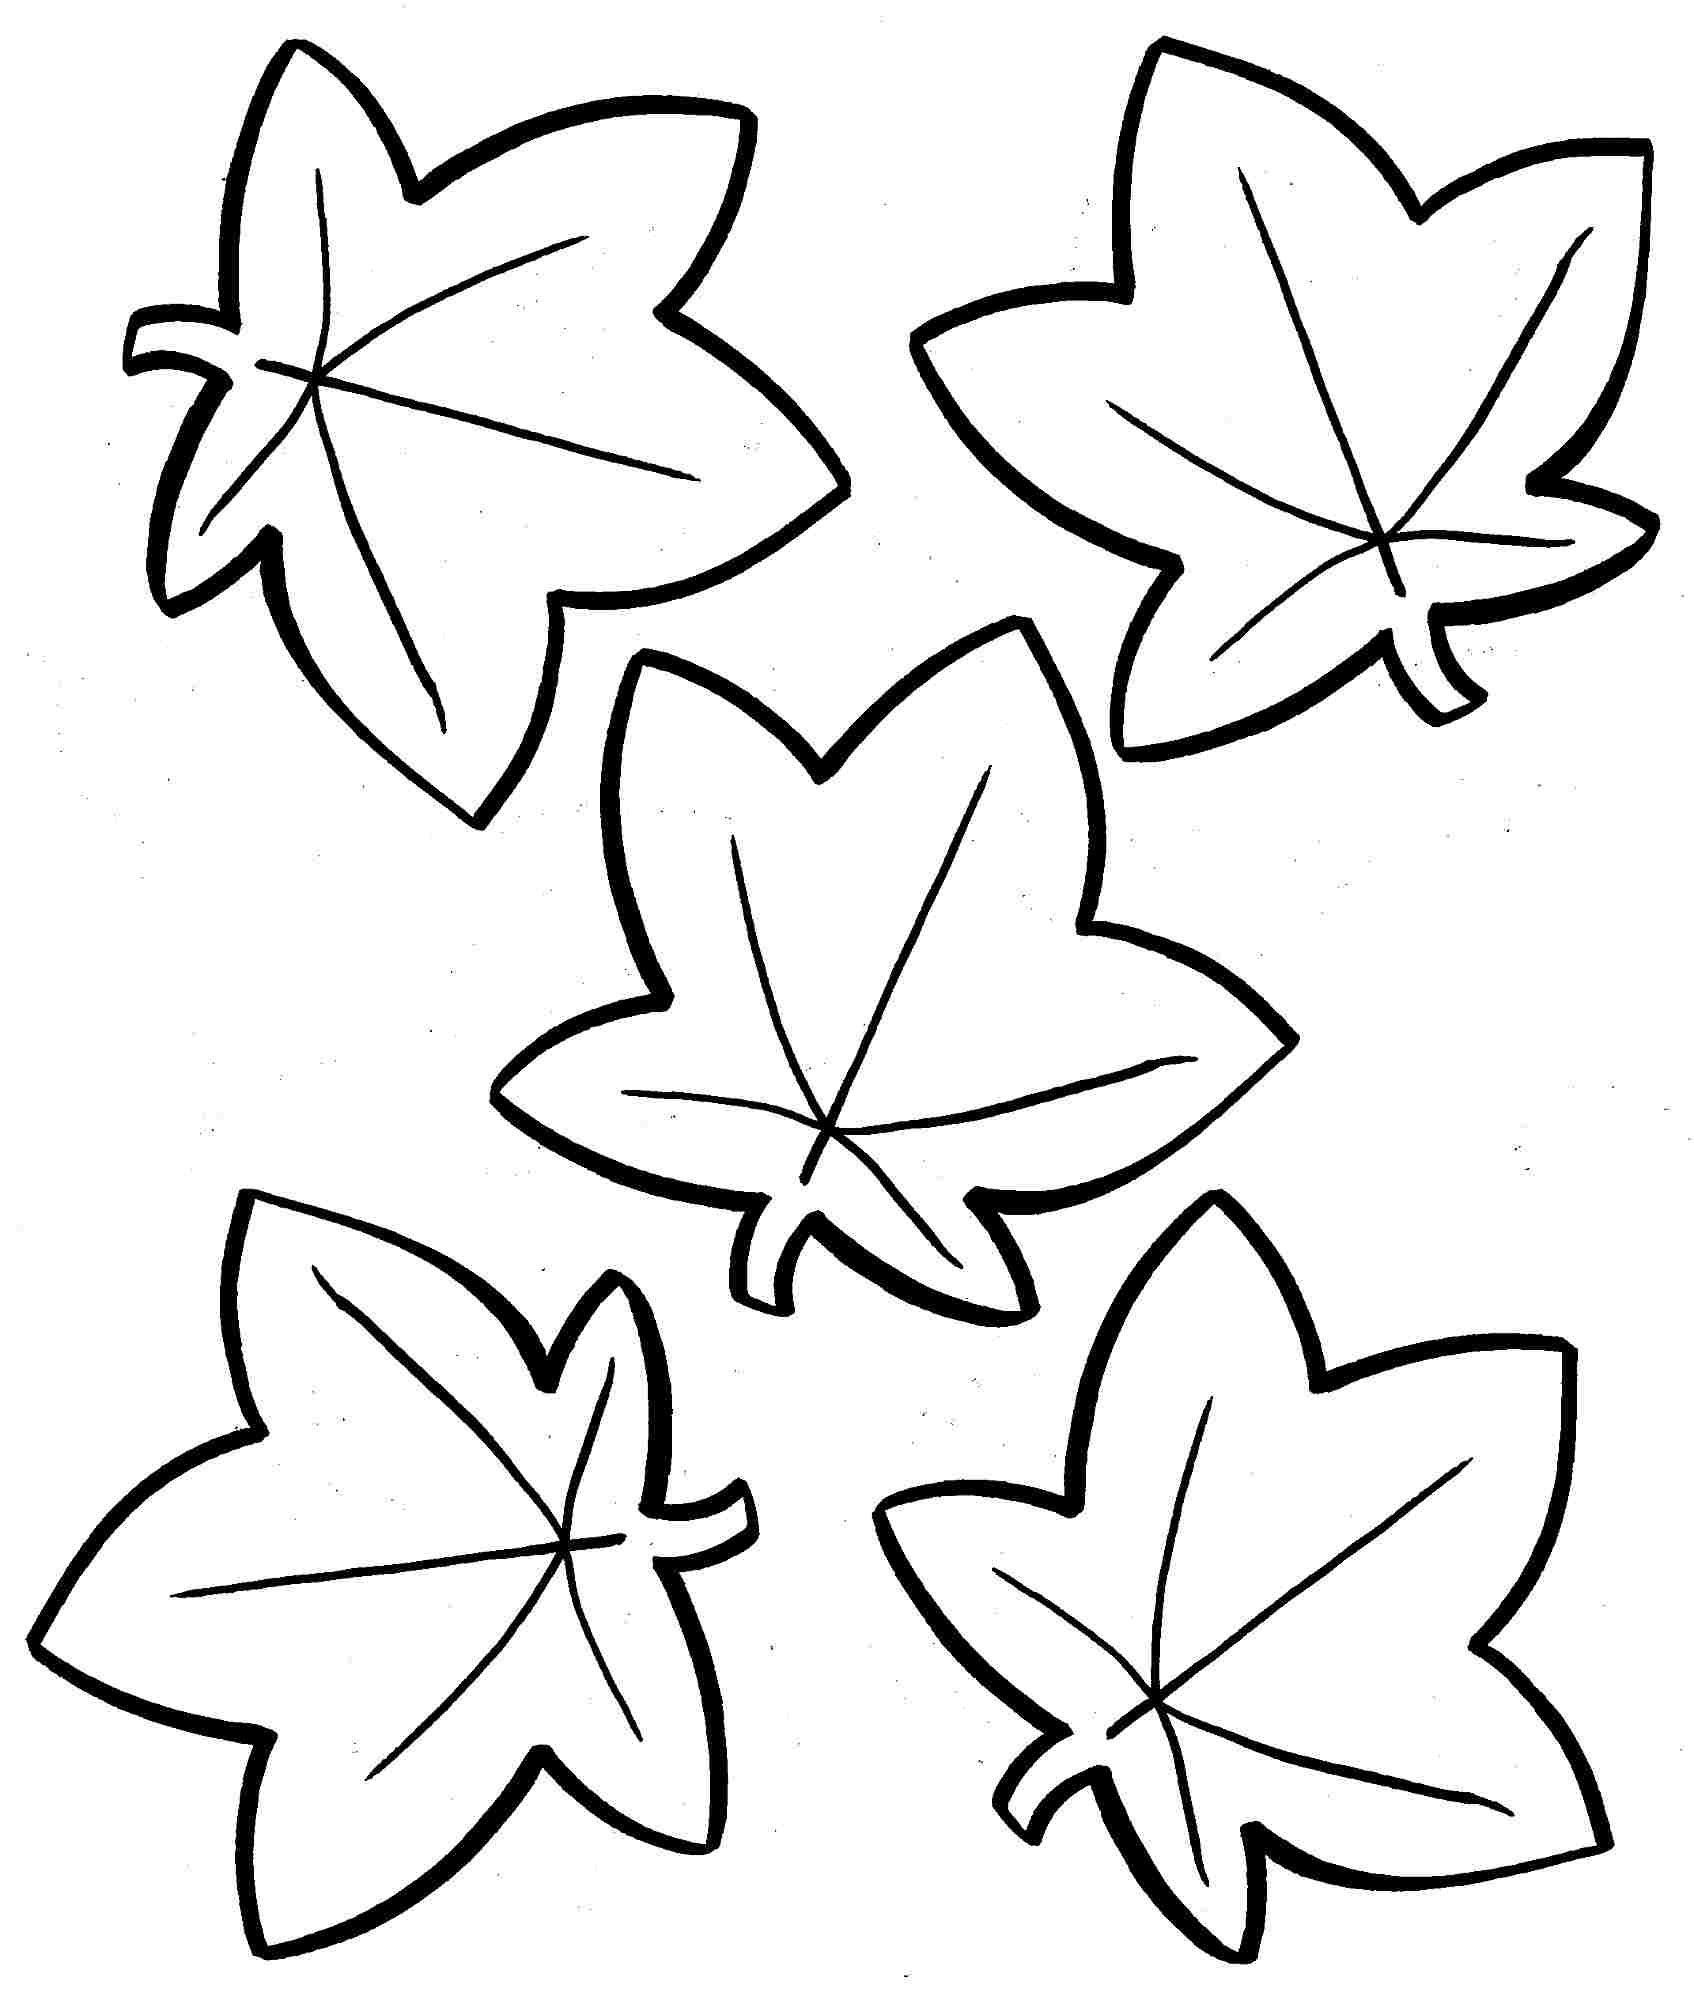 Coloring: Autumn Leaves Coloring Pages. - Free Printable Leaf Coloring Pages